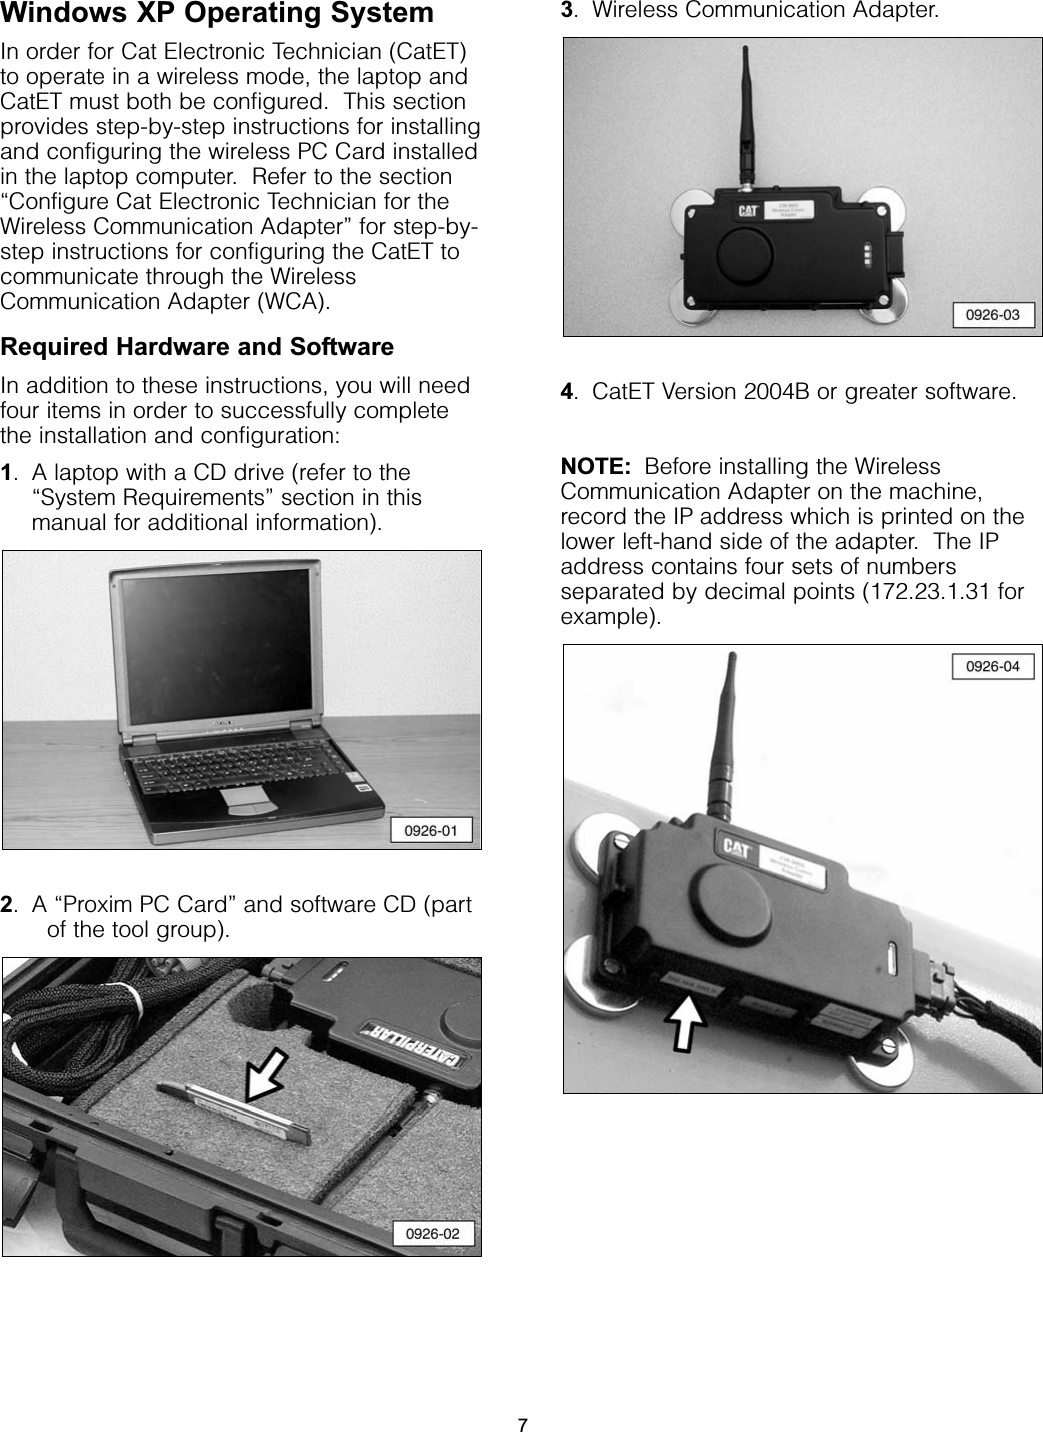 Windows XP Operating SystemIn order for Cat Electronic Technician (CatET)to operate in a wireless mode, the laptop andCatET must both be configured.  This sectionprovides step-by-step instructions for installingand configuring the wireless PC Card installedin the laptop computer.  Refer to the section“Configure Cat Electronic Technician for theWireless Communication Adapter” for step-by-step instructions for configuring the CatET tocommunicate through the WirelessCommunication Adapter (WCA).Required Hardware and SoftwareIn addition to these instructions, you will needfour items in order to successfully completethe installation and configuration:1. A laptop with a CD drive (refer to the“System Requirements” section in thismanual for additional information).2. A “Proxim PC Card” and software CD (partof the tool group).3. Wireless Communication Adapter.4. CatET Version 2004B or greater software.NOTE: Before installing the WirelessCommunication Adapter on the machine,record the IP address which is printed on thelower left-hand side of the adapter.  The IPaddress contains four sets of numbersseparated by decimal points (172.23.1.31 forexample).7